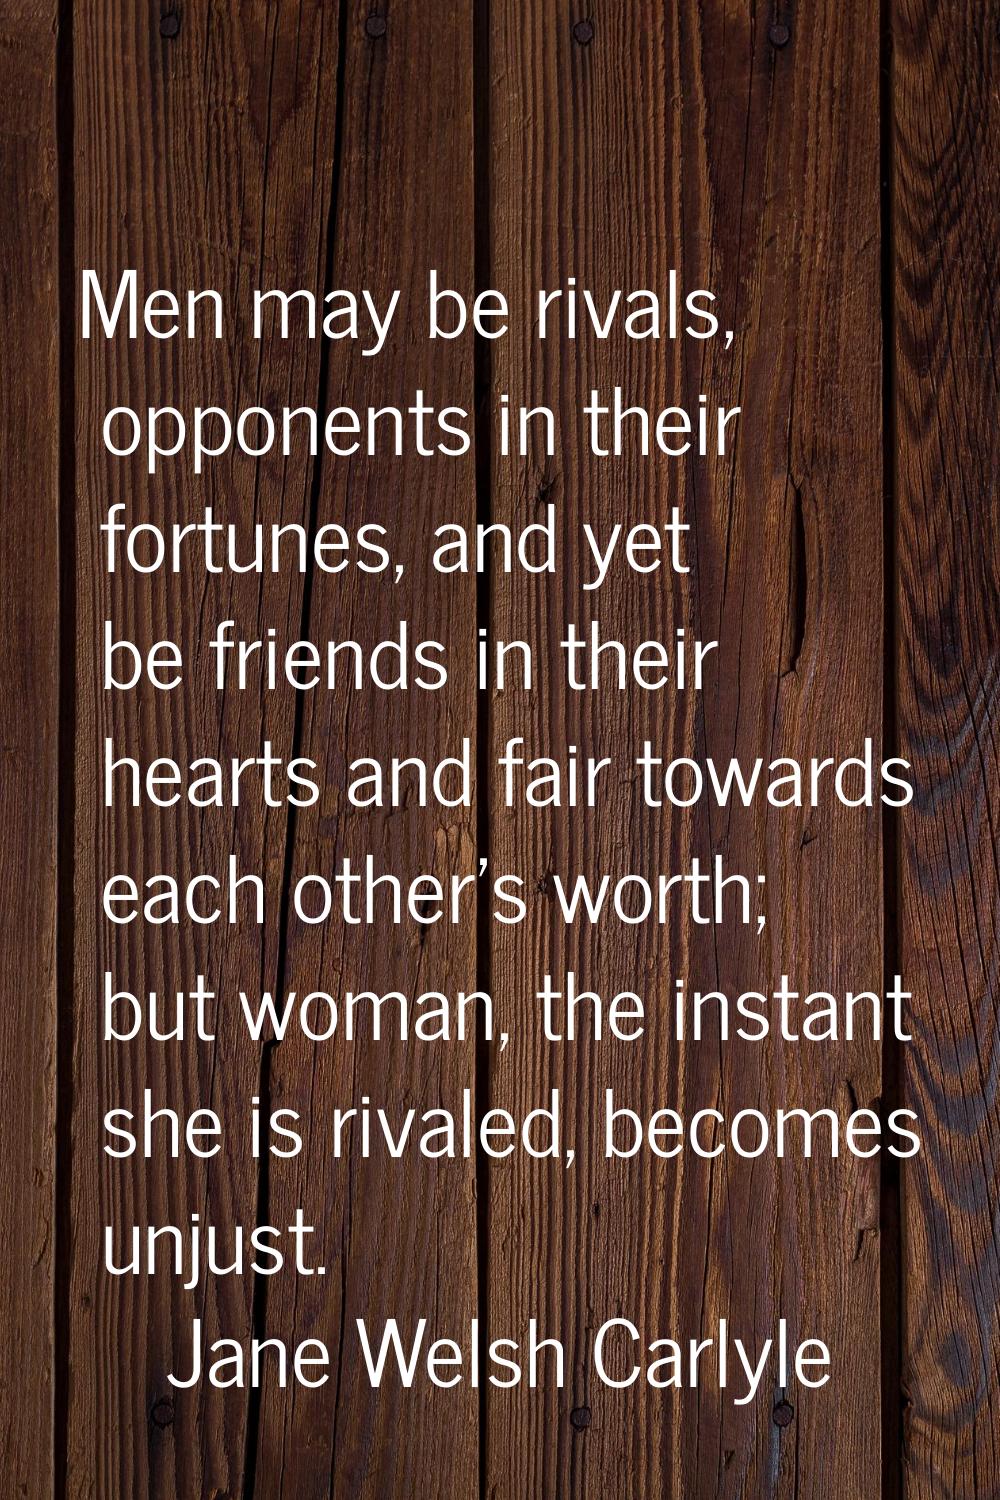 Men may be rivals, opponents in their fortunes, and yet be friends in their hearts and fair towards